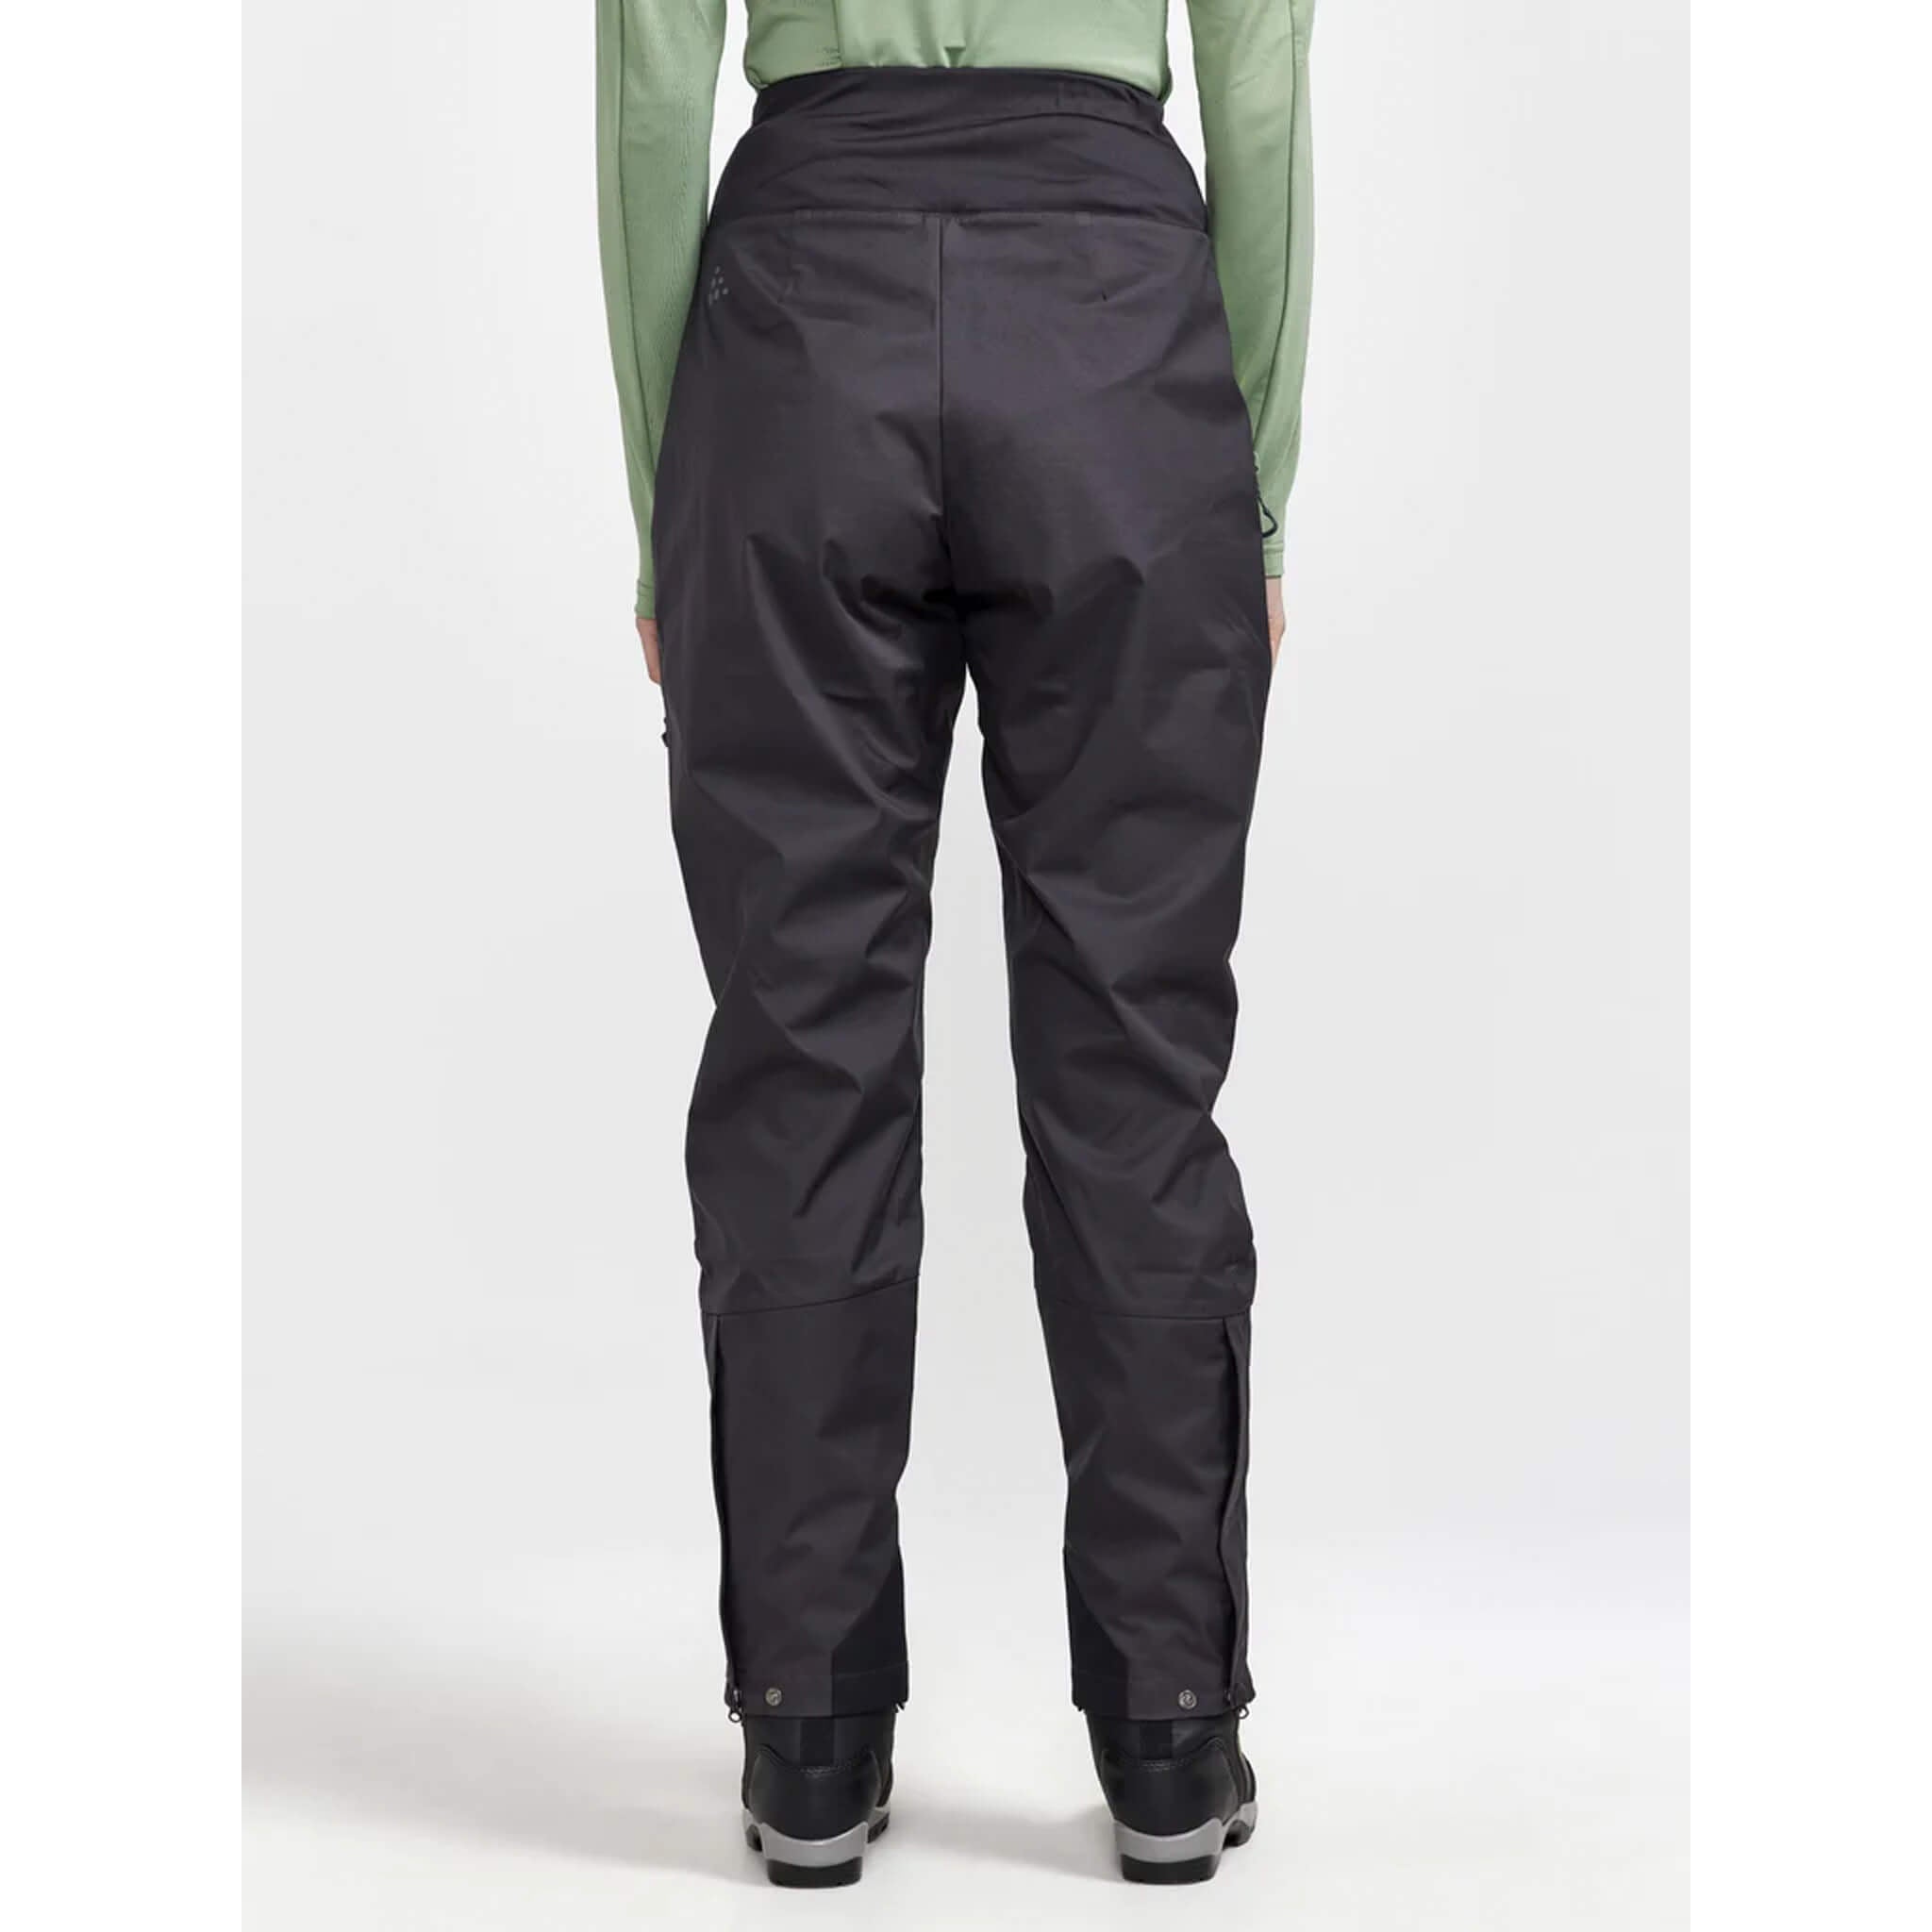 Craft Adv Backcountry Pant W